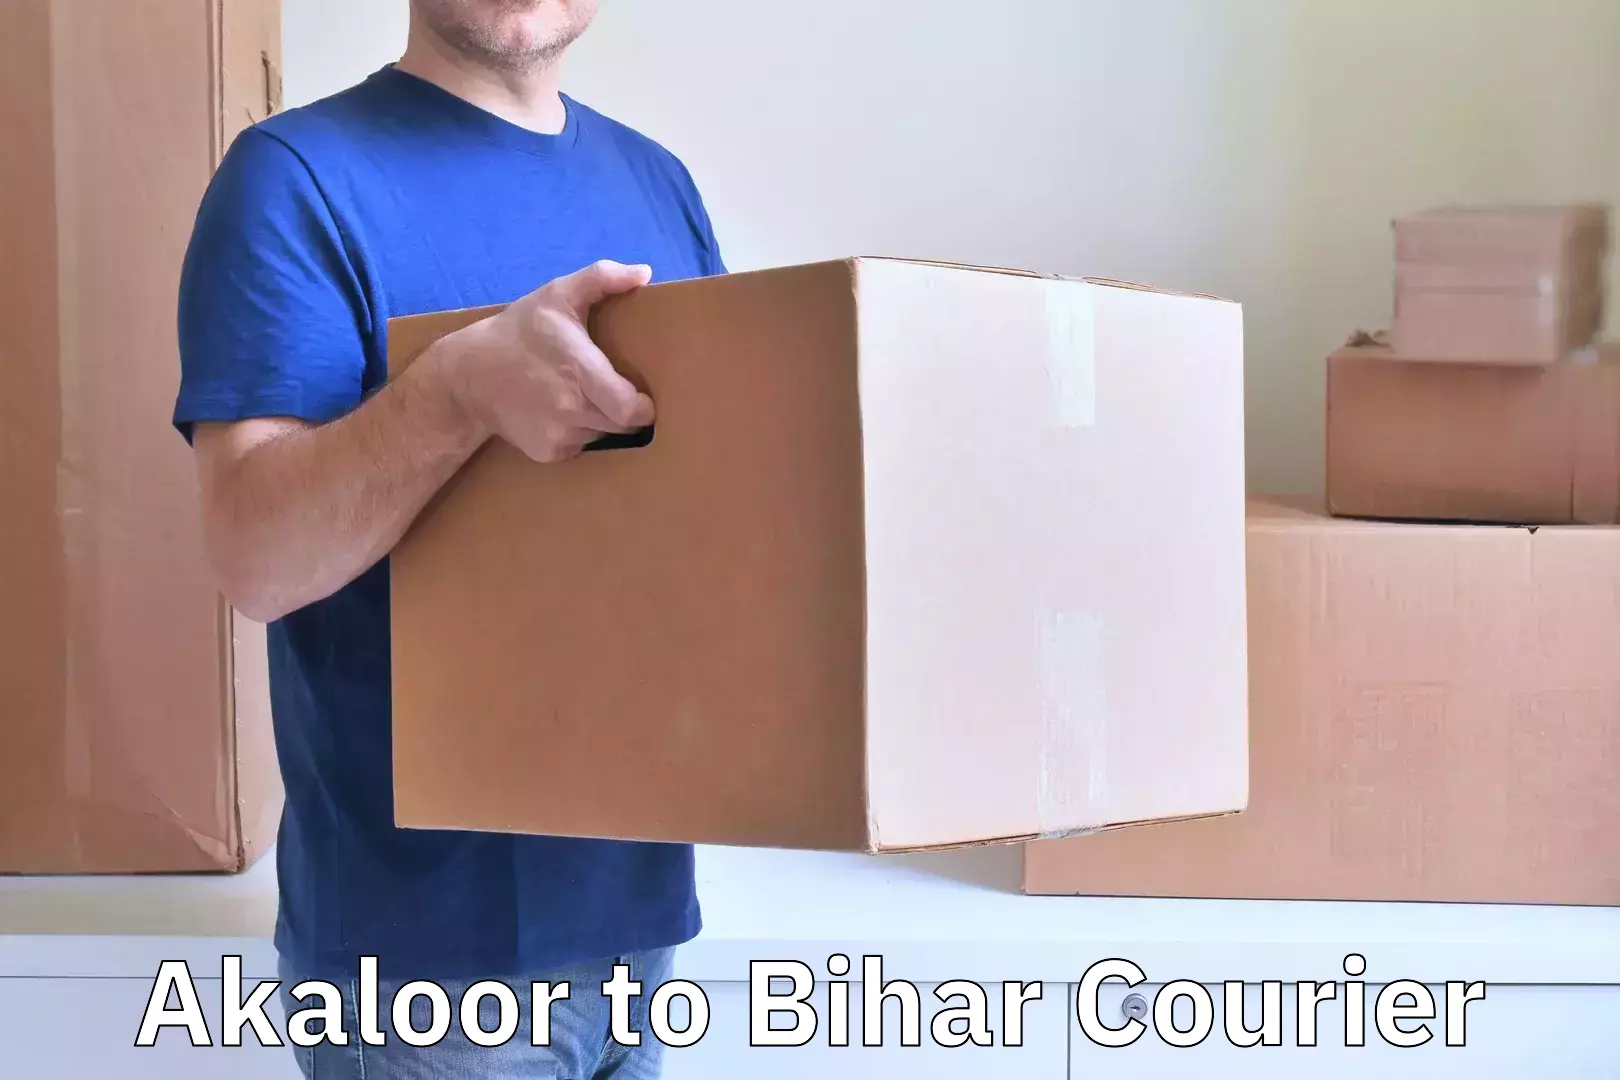 Luggage delivery system Akaloor to Bihar